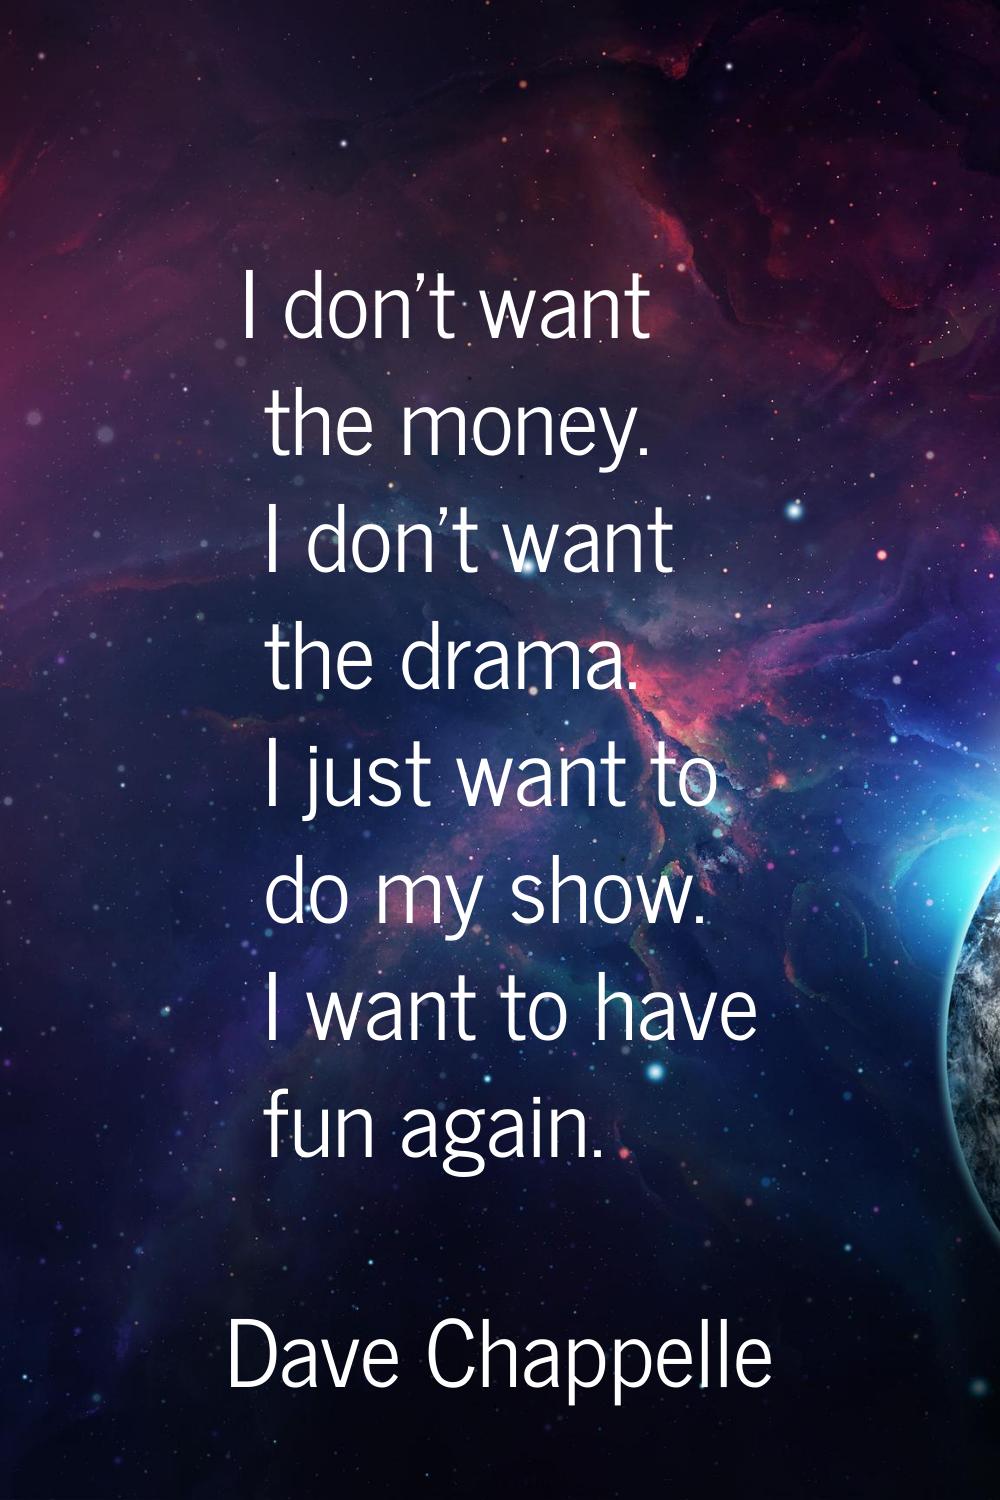 I don't want the money. I don't want the drama. I just want to do my show. I want to have fun again